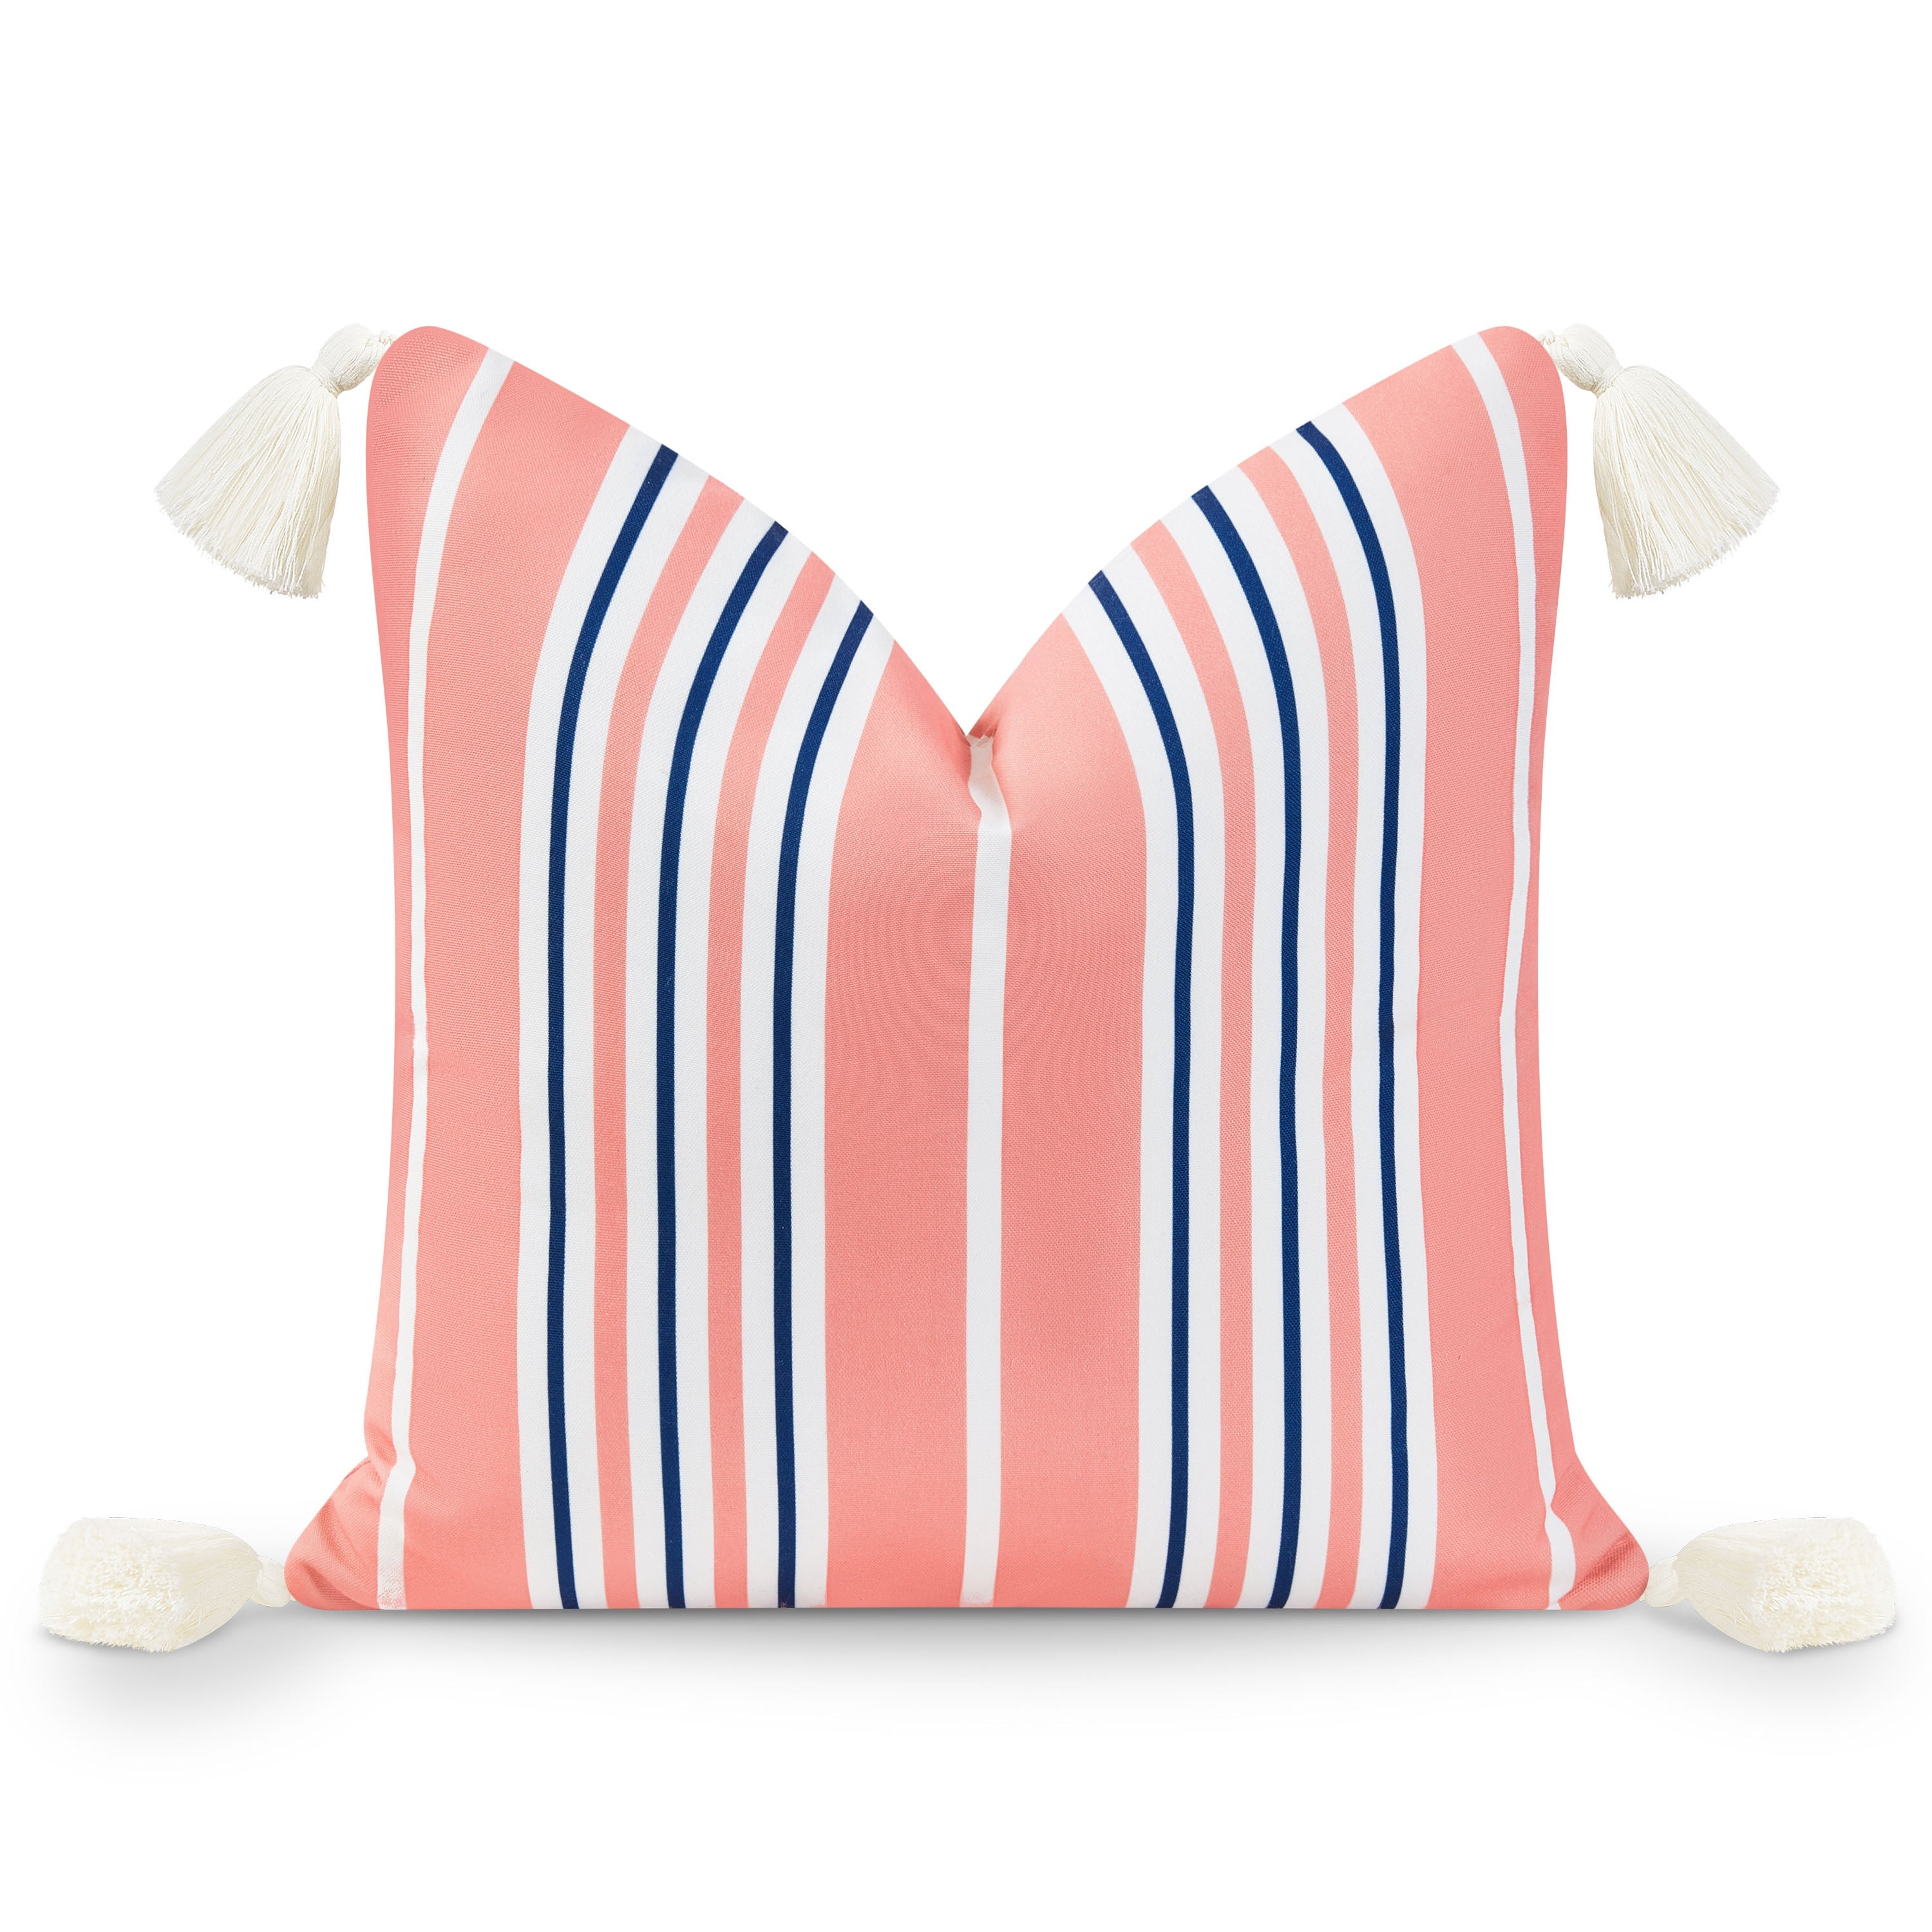 Coastal Indoor Outdoor Throw Pillow Cover, Stripe Tassel, Coral Pink Navy Blue, 18"x18"-0